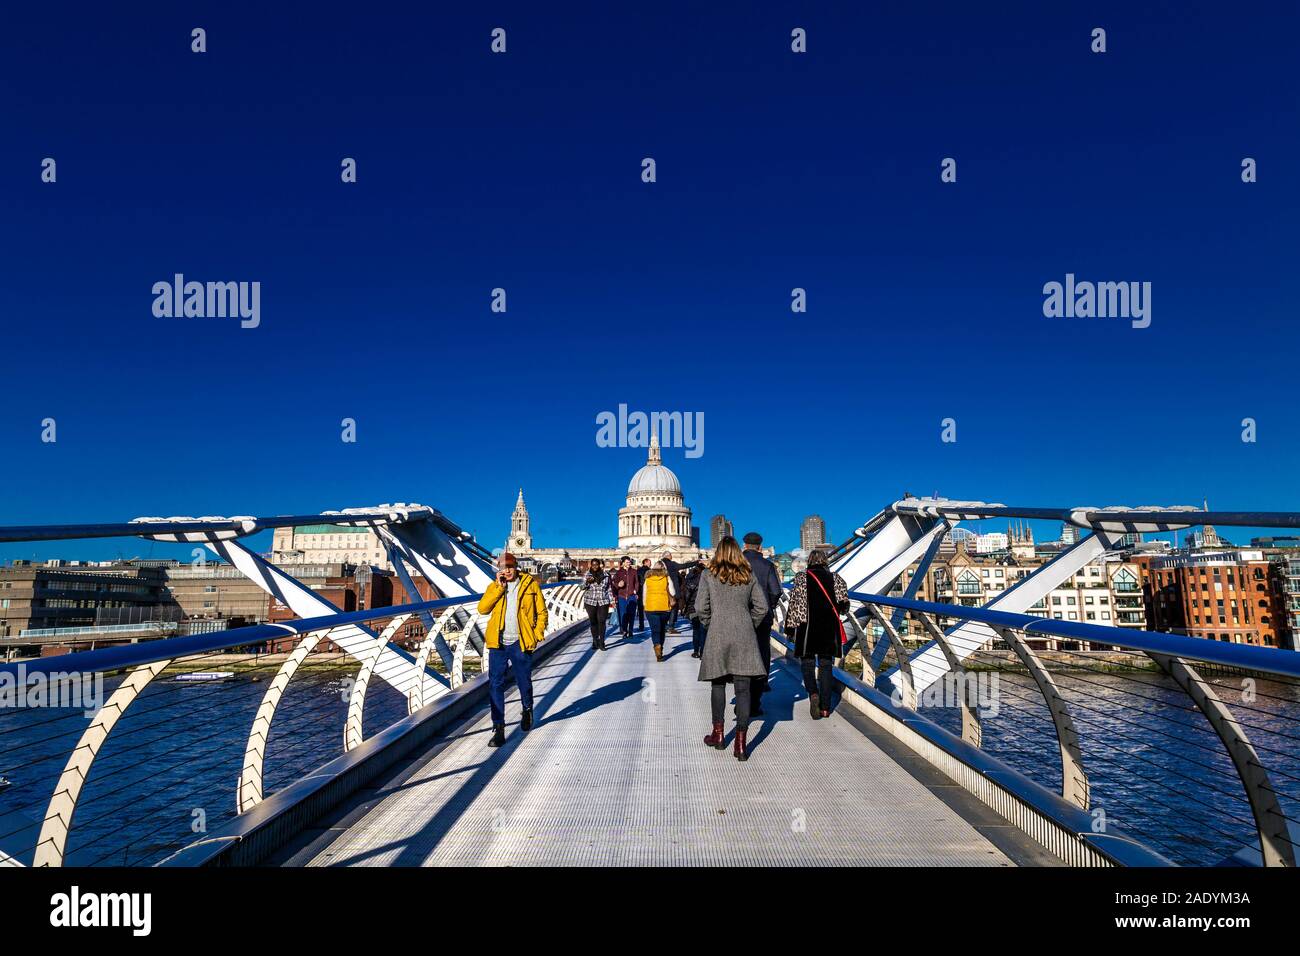 People walking on the Millennium Bridge with view of St Pauls Cathedral, London, UK Stock Photo